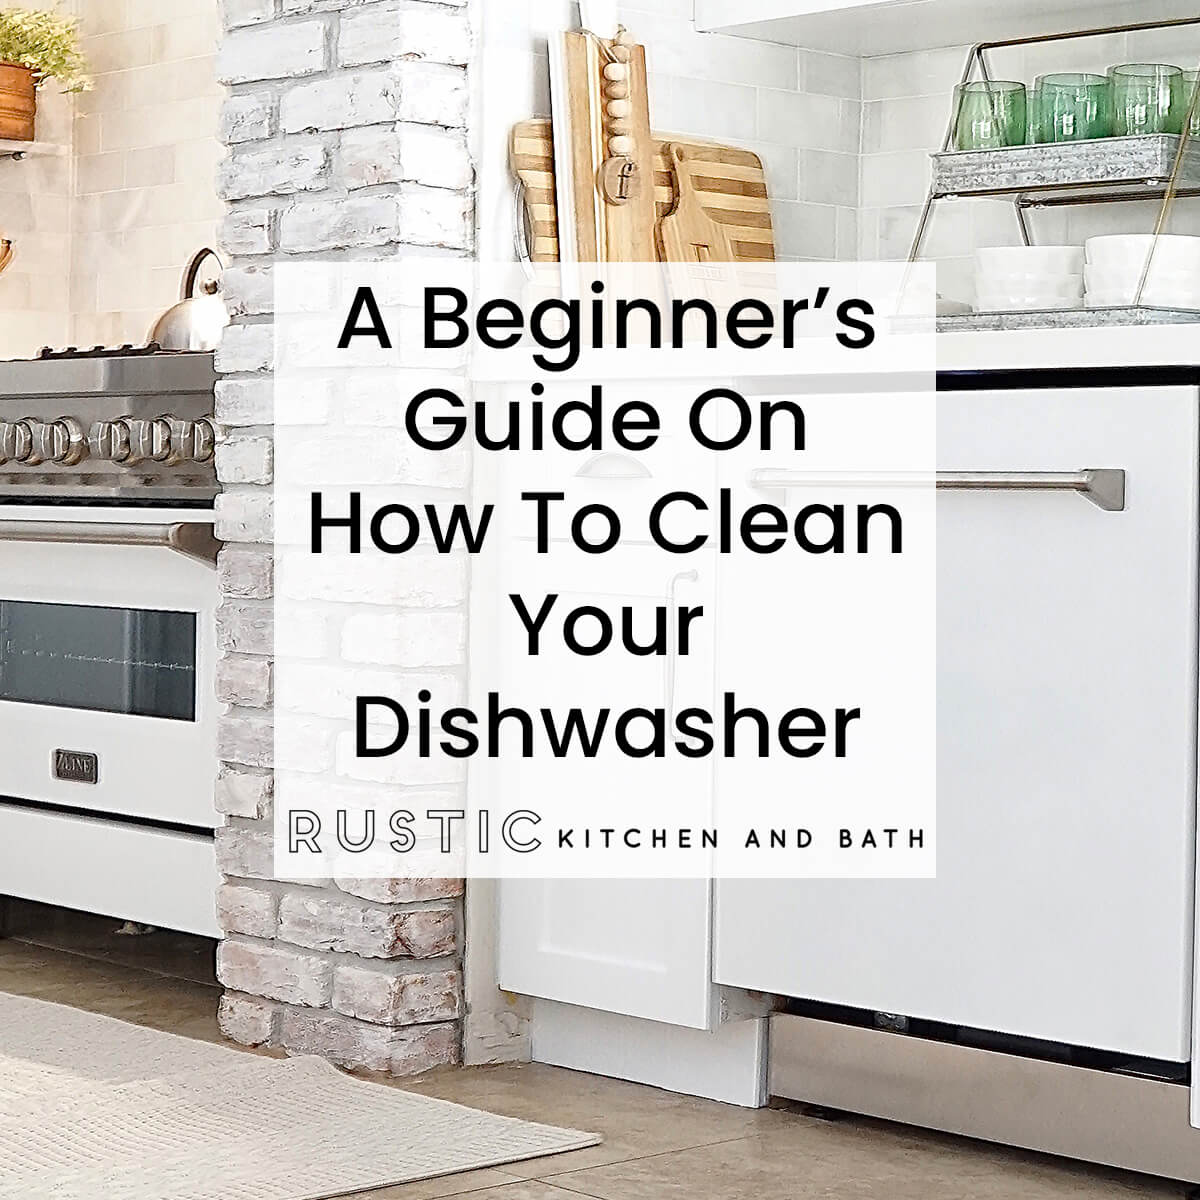 A Beginner’s Guide On How To Clean Your Dishwasher